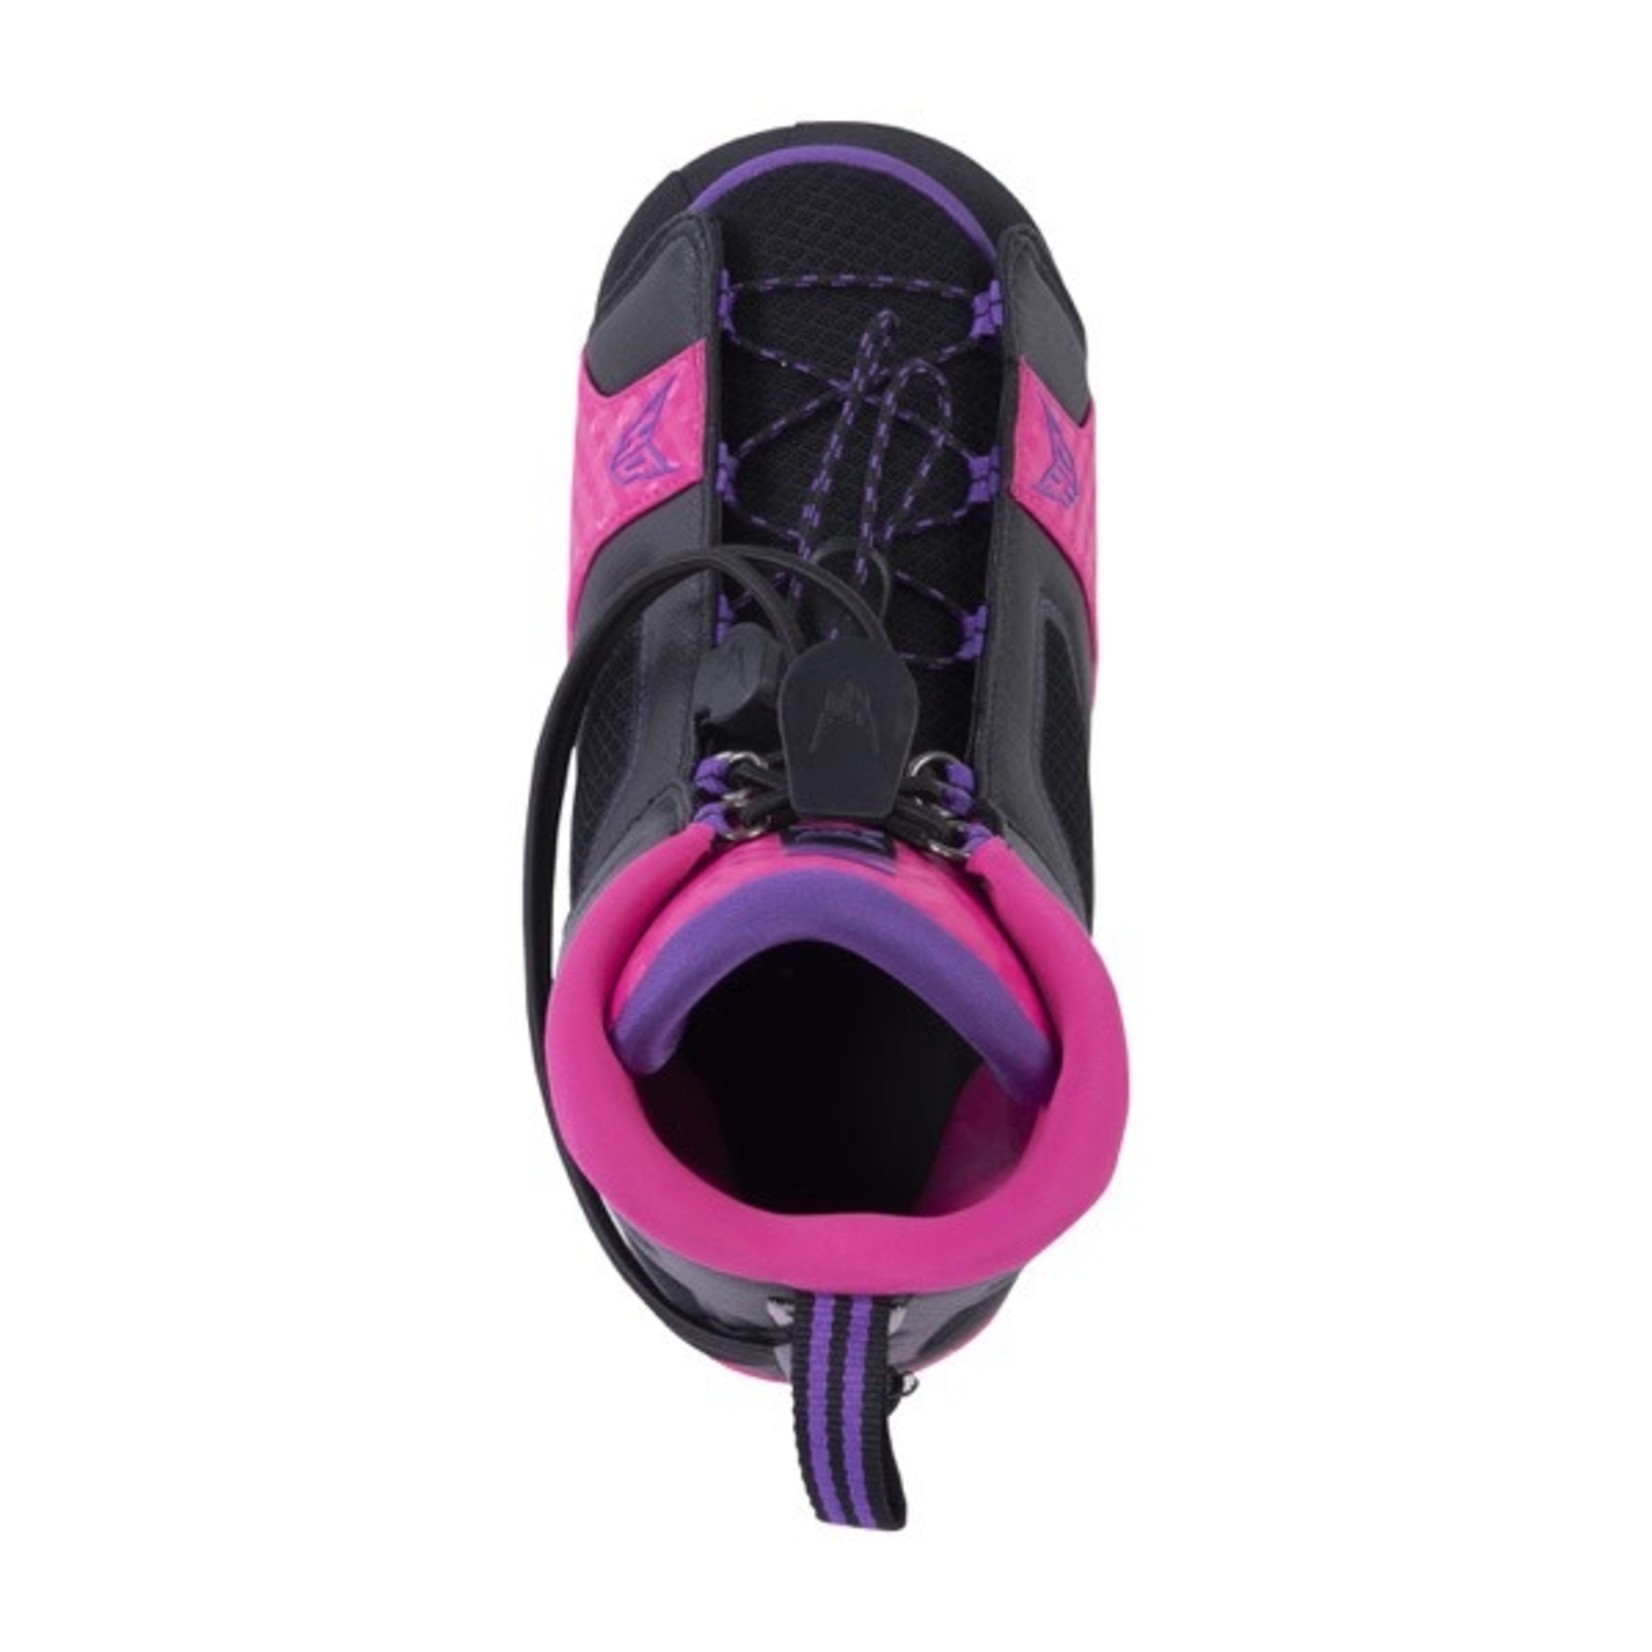 HO/Hyperlite Womens FreeMax Direct Connect Slalom Boot 2019